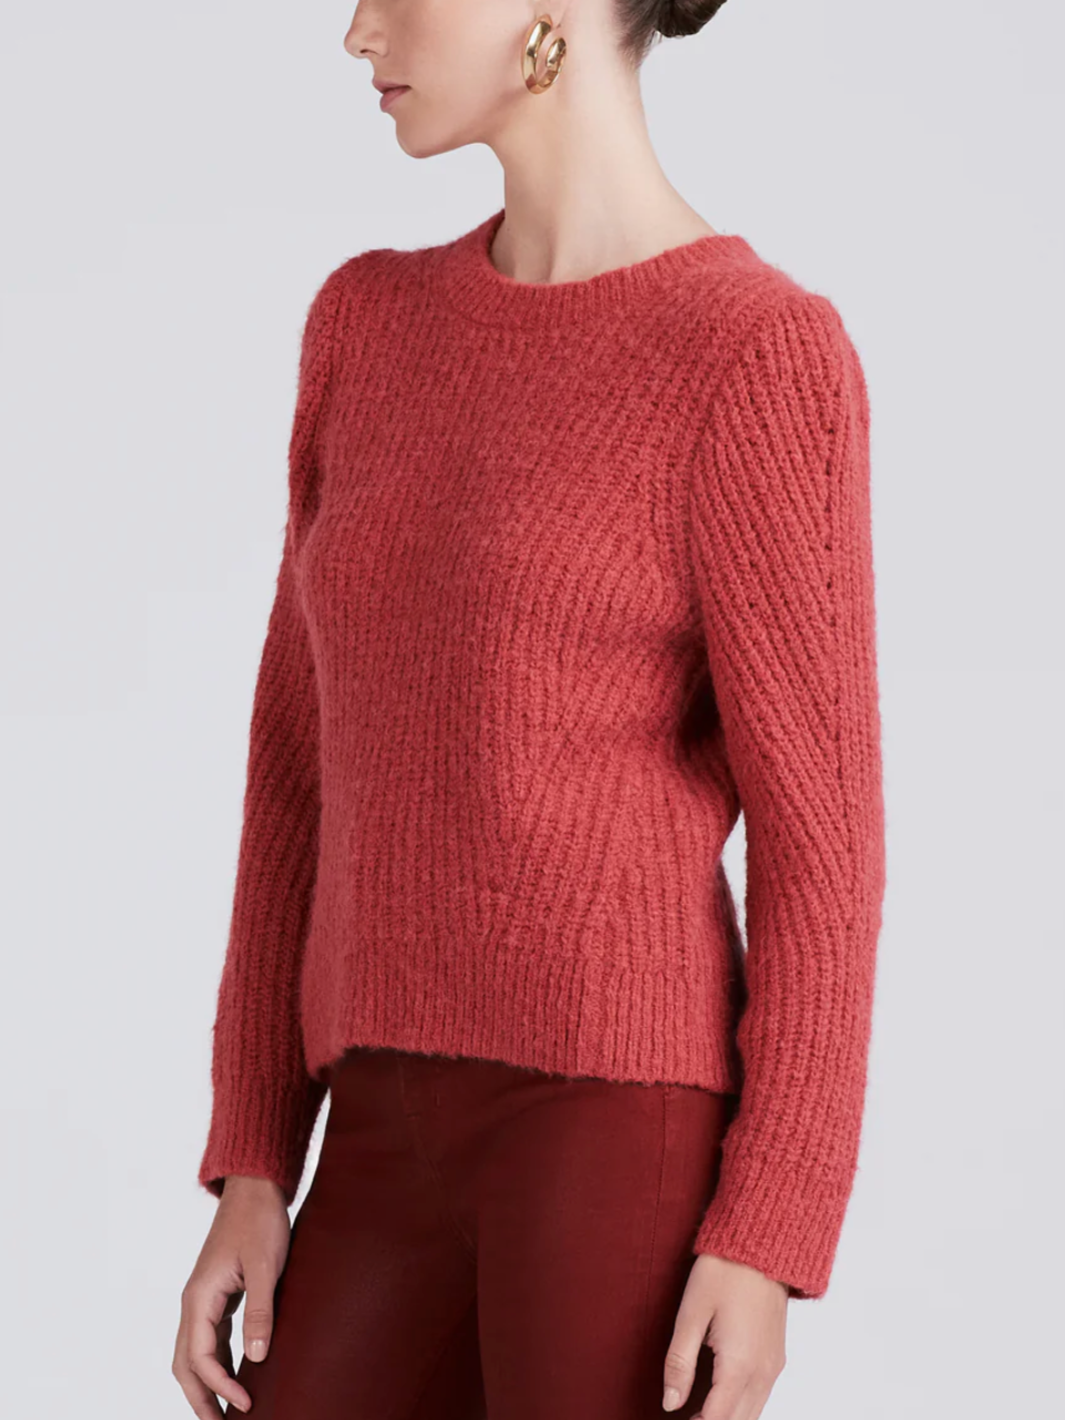 RYAN PULLOVER SWEATER IN RHUBARB - Romi Boutique